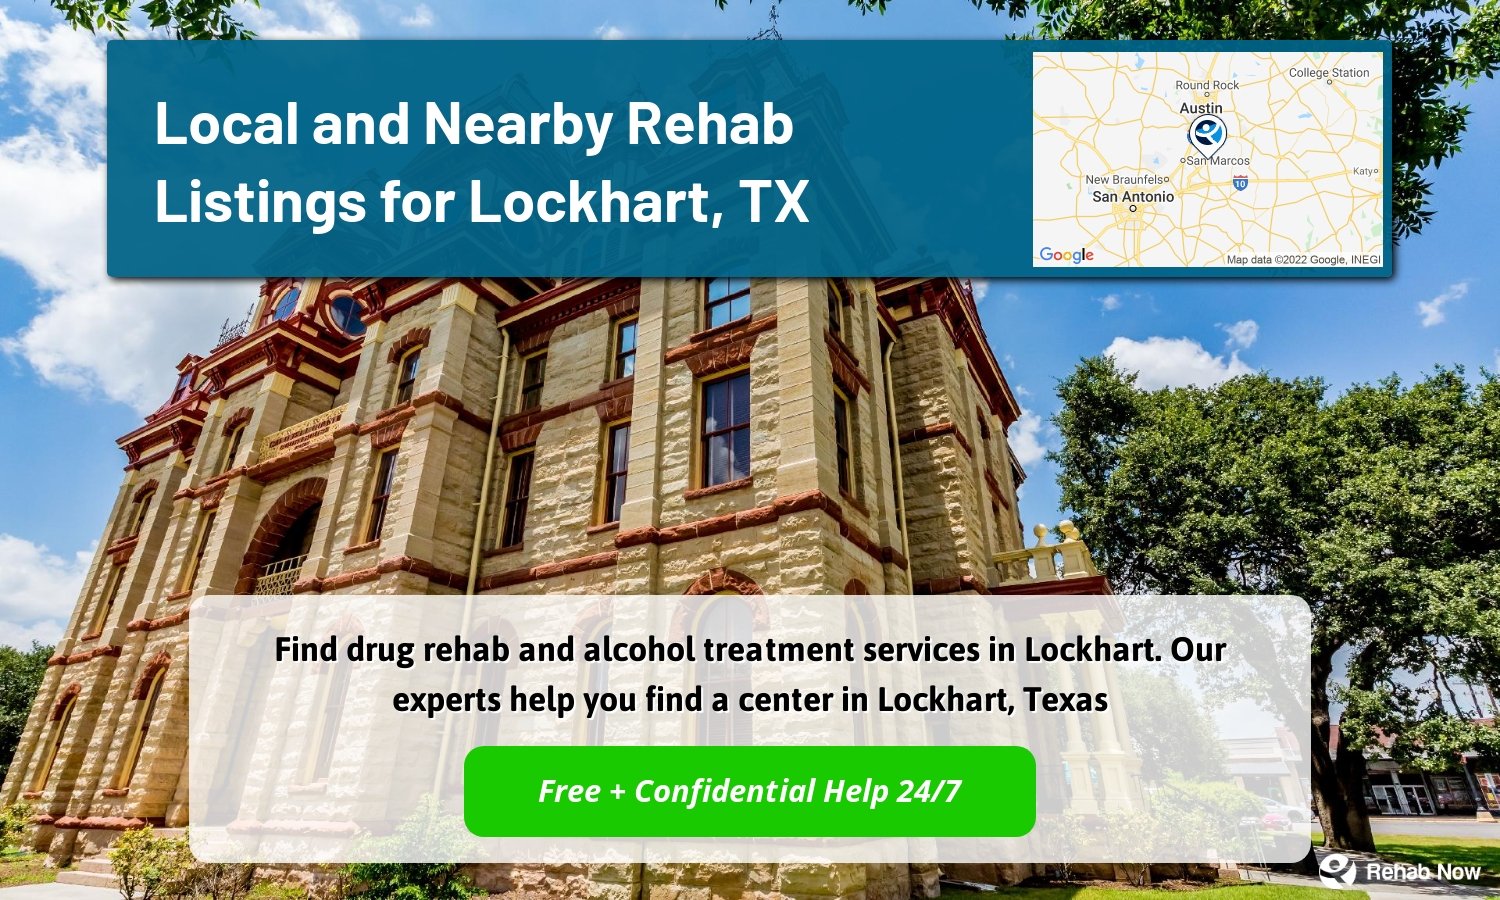 Find drug rehab and alcohol treatment services in Lockhart. Our experts help you find a center in Lockhart, Texas